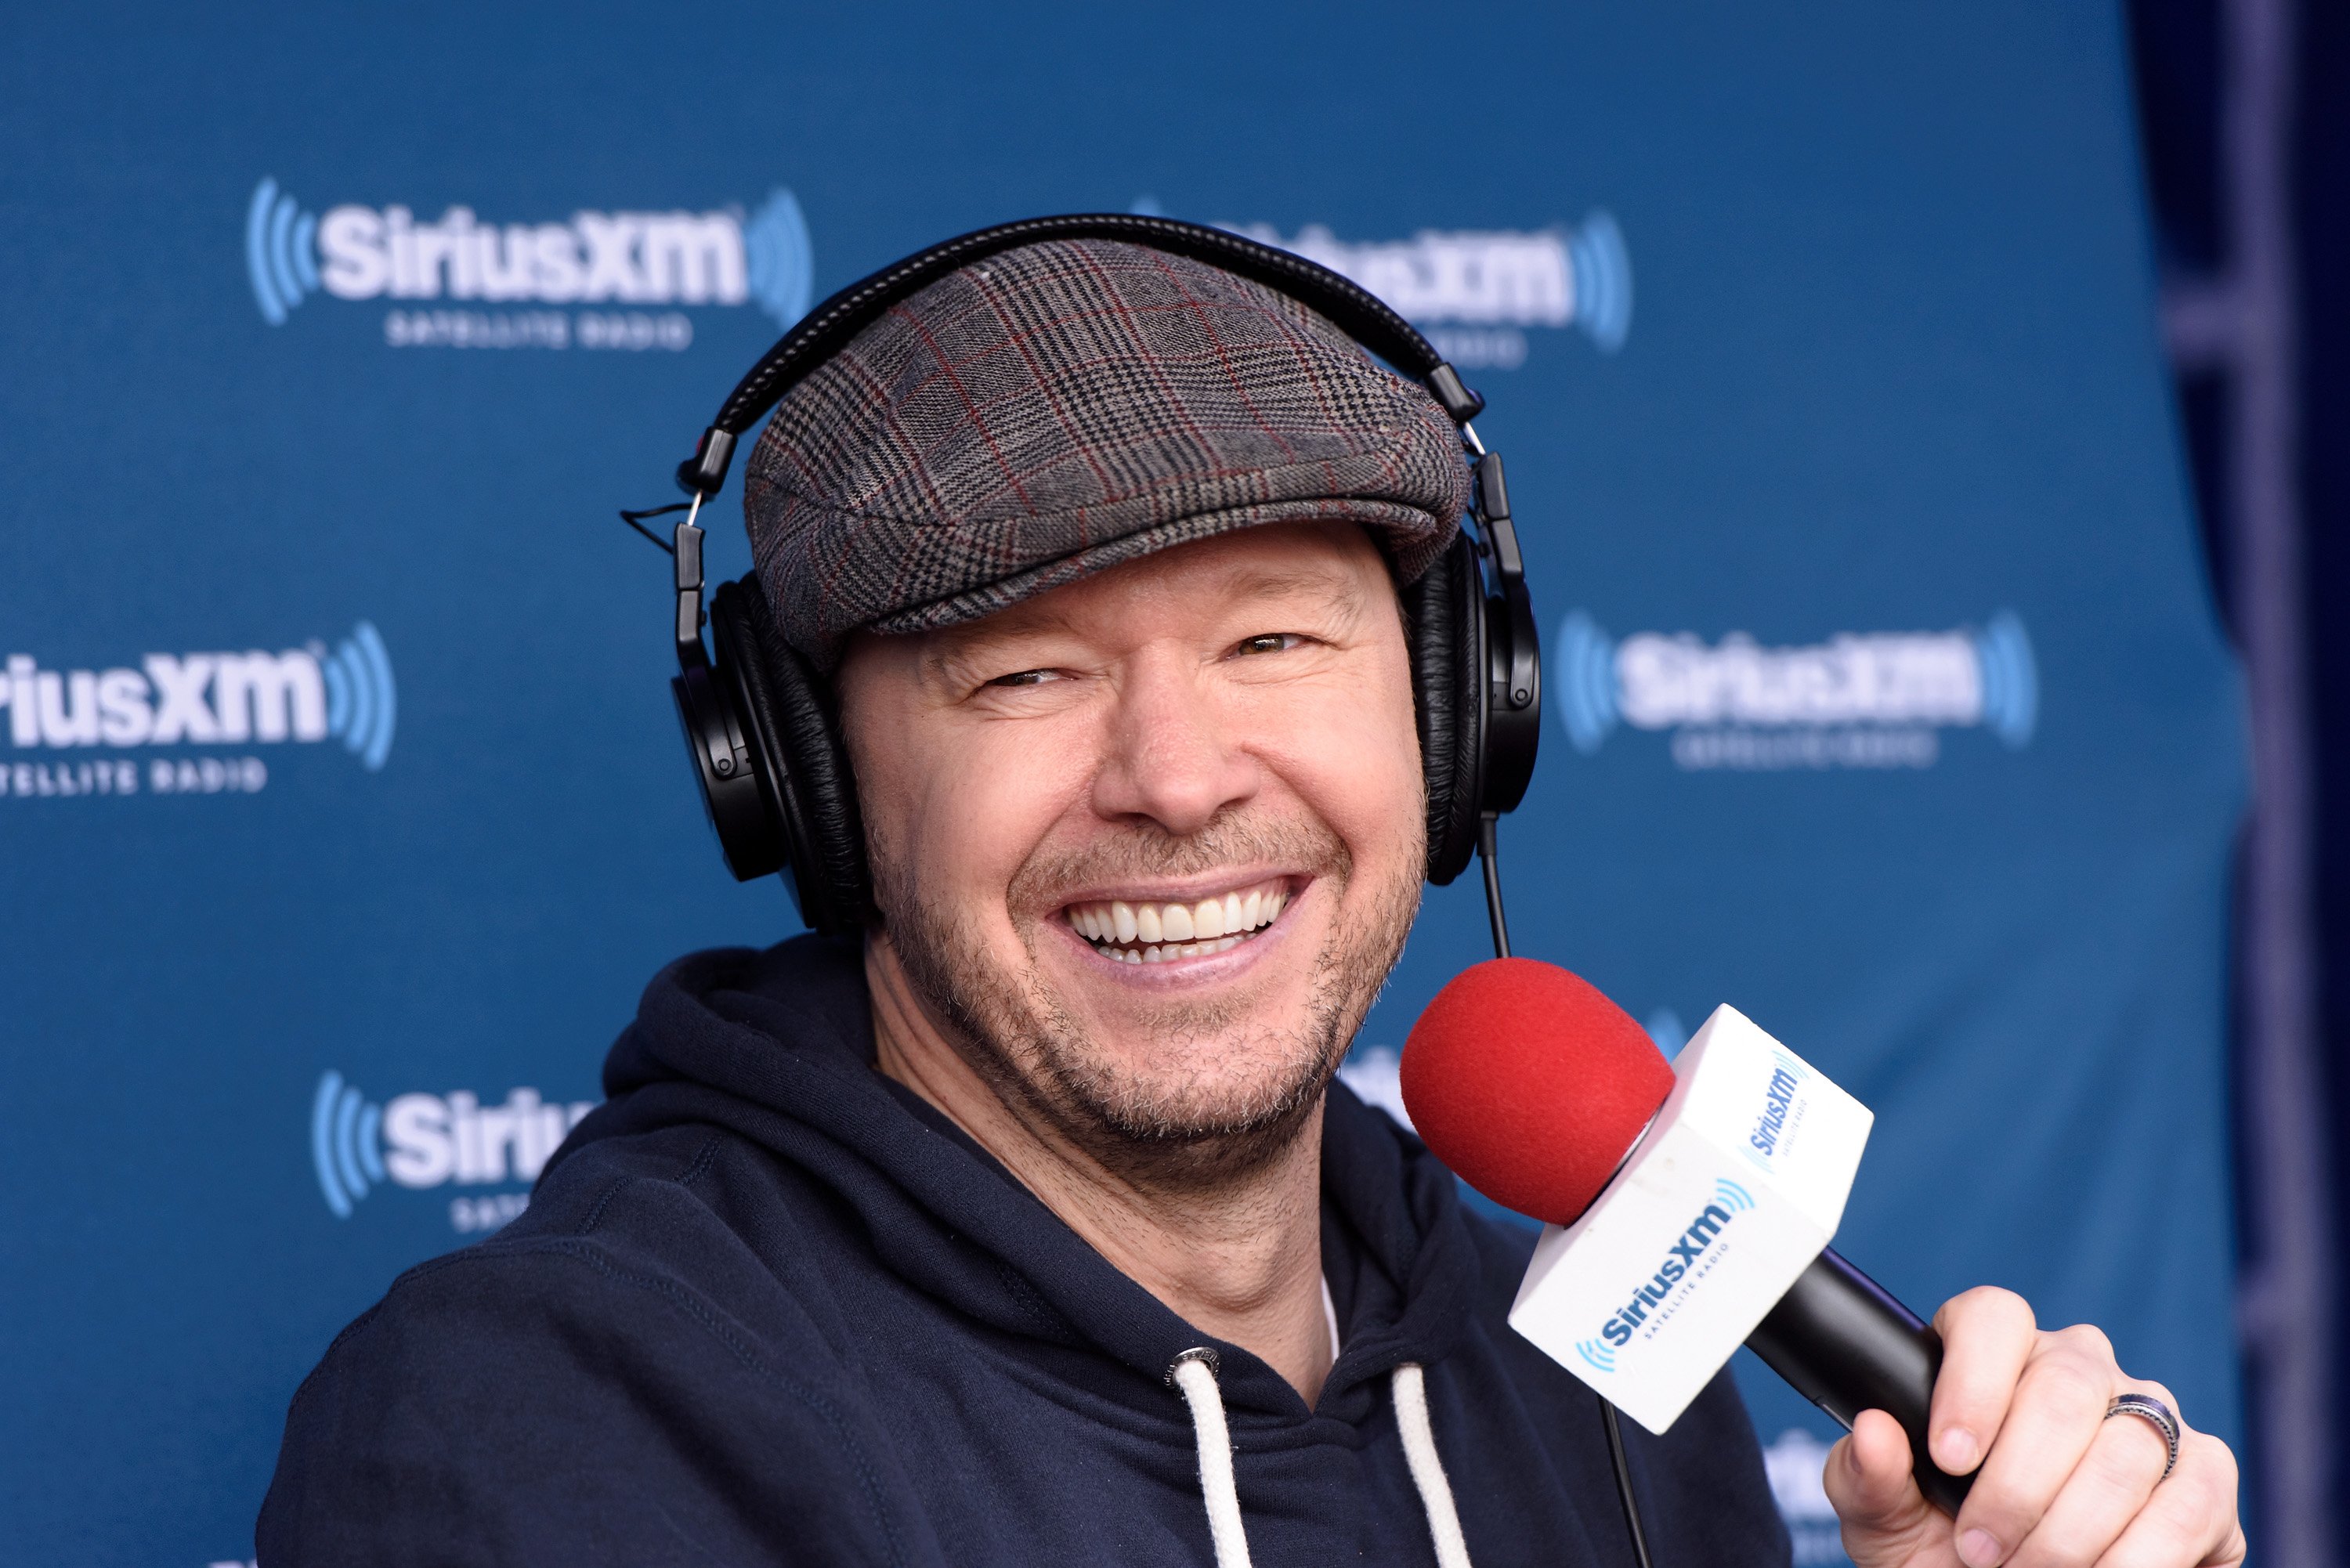 Donnie Wahlberg attends Jenny McCarthy's SiriusXM show on April 28, 2016 in Chicago, Illinois. | Photo: Getty Images